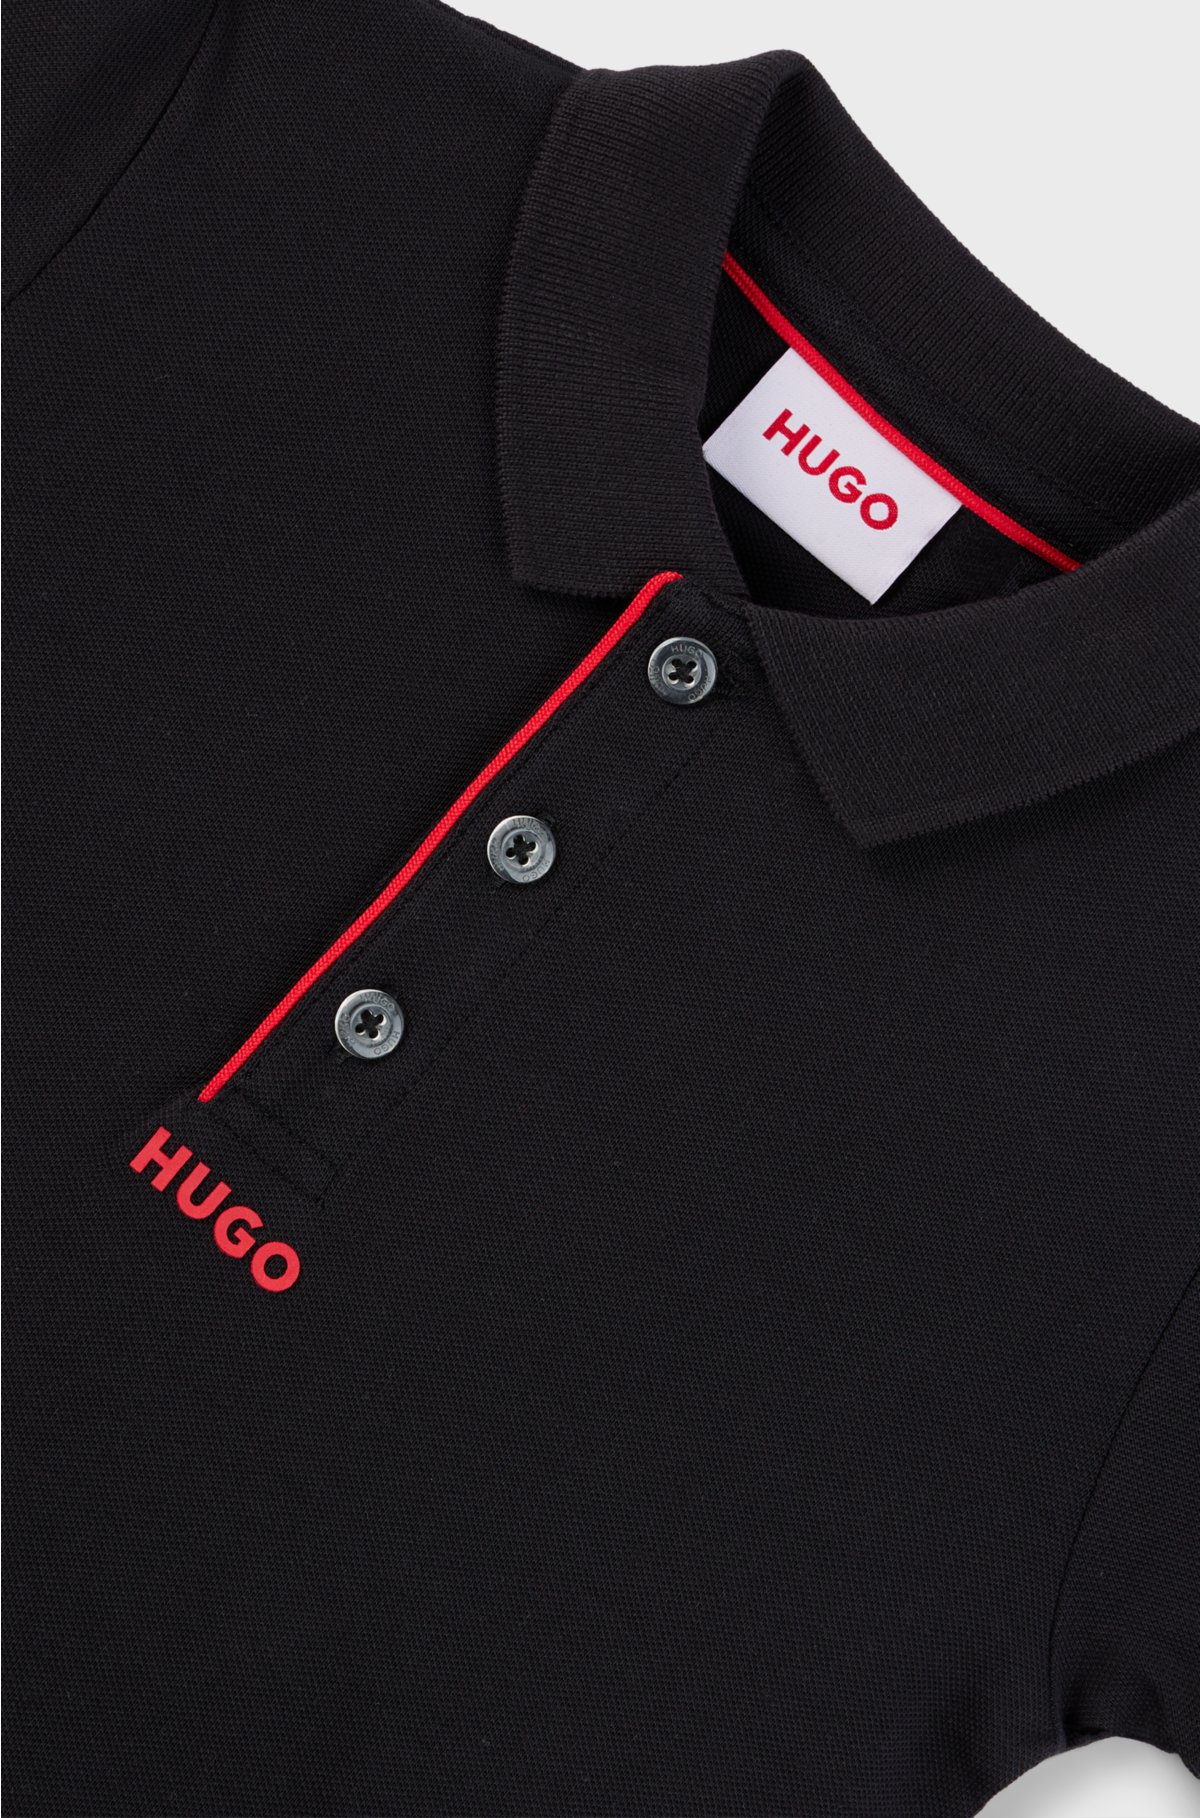 Kids' polo shirt in stretch cotton with logo print, Black